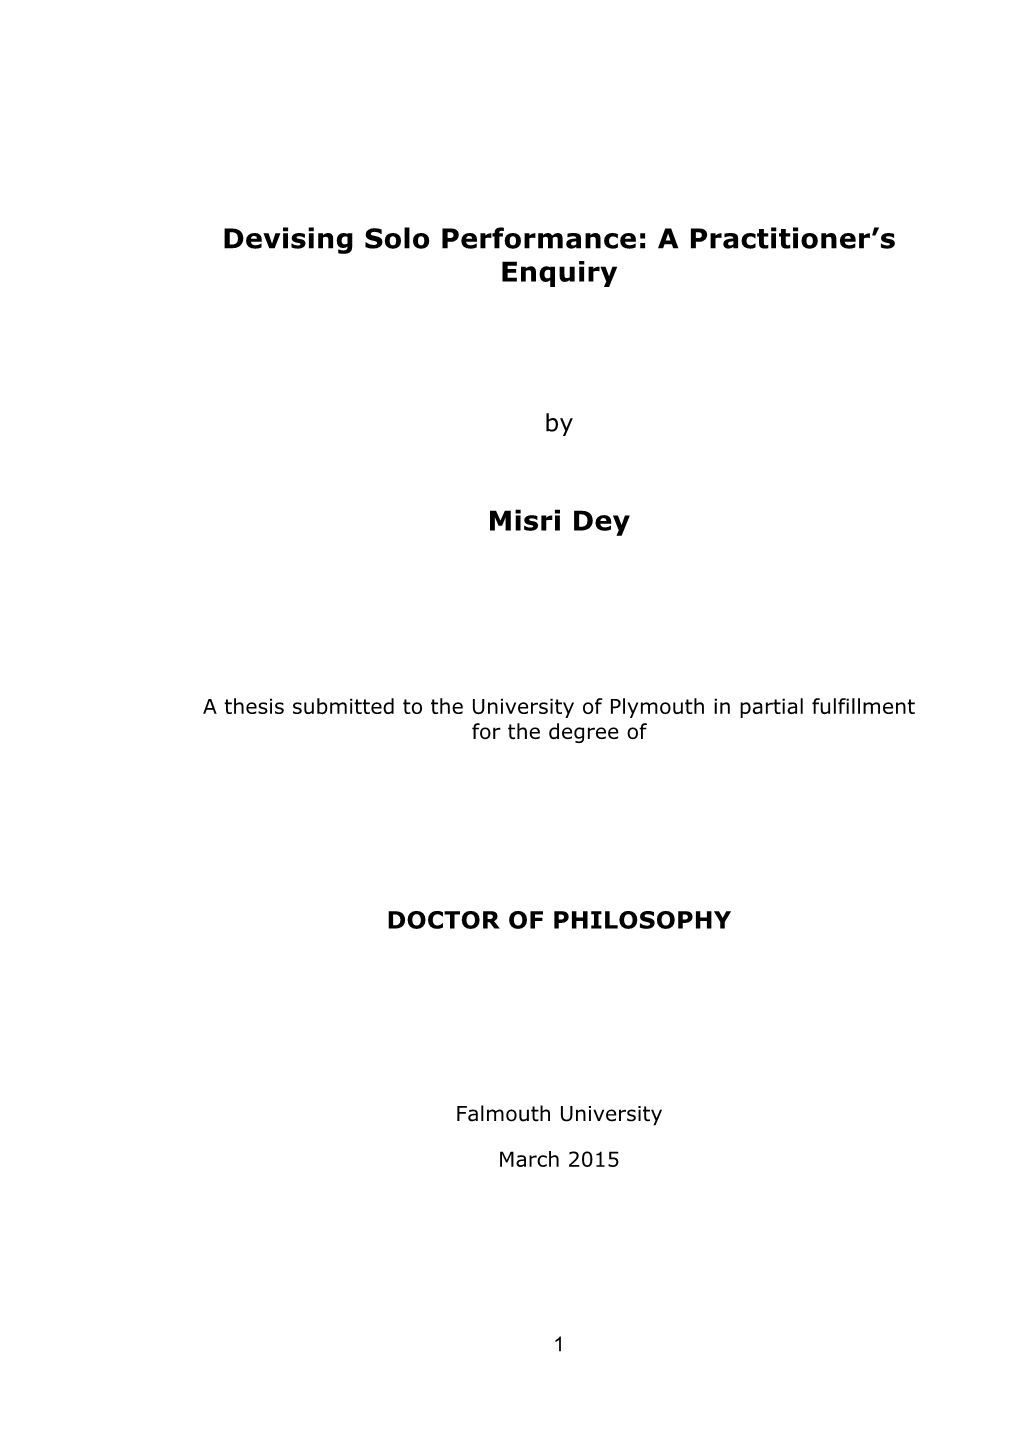 Devising Solo Performance: a Practitioner's Enquiry Misri